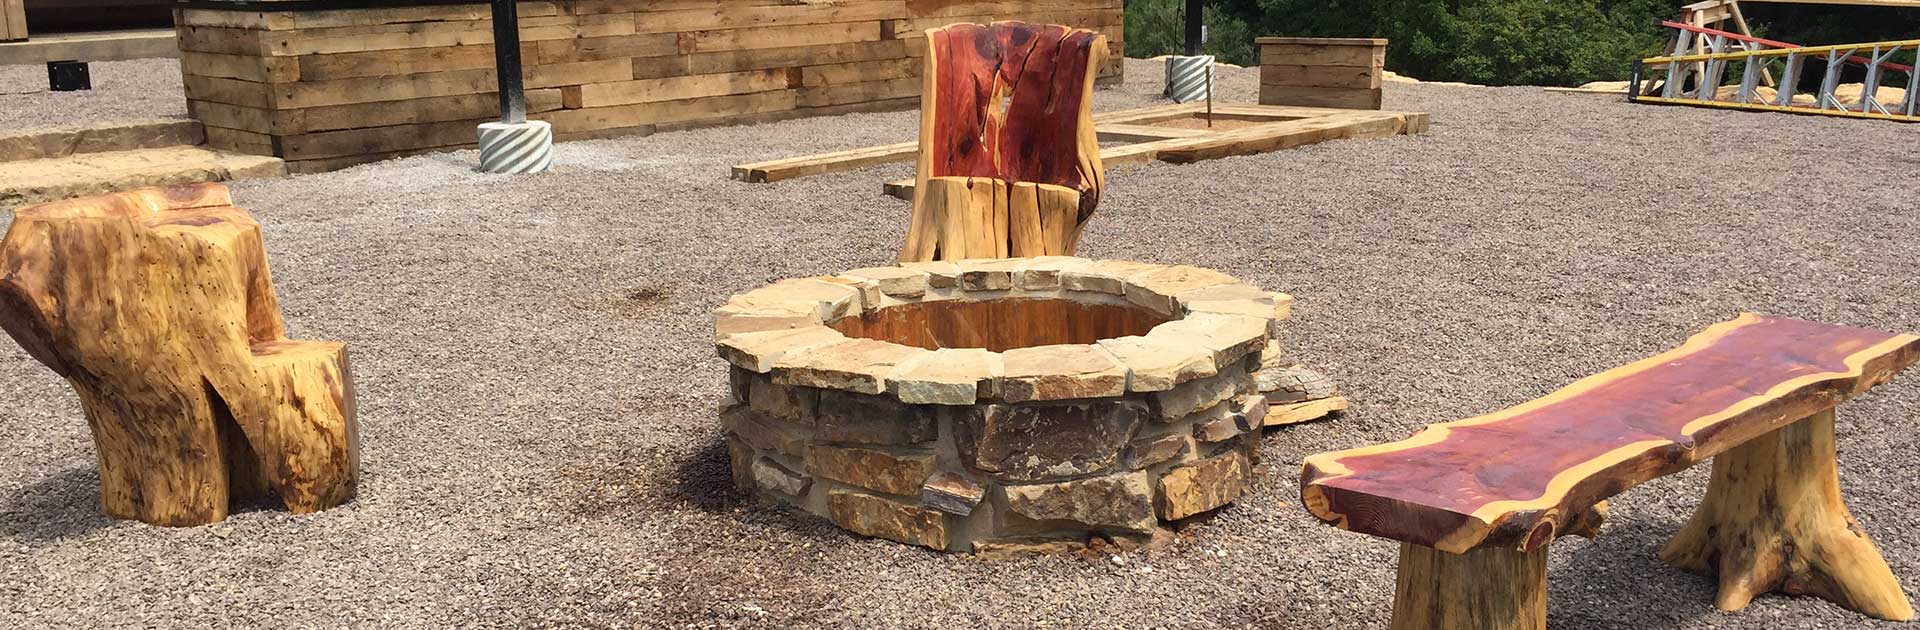 Outdoor Firepits St Louis Select, Fire Pits St Louis